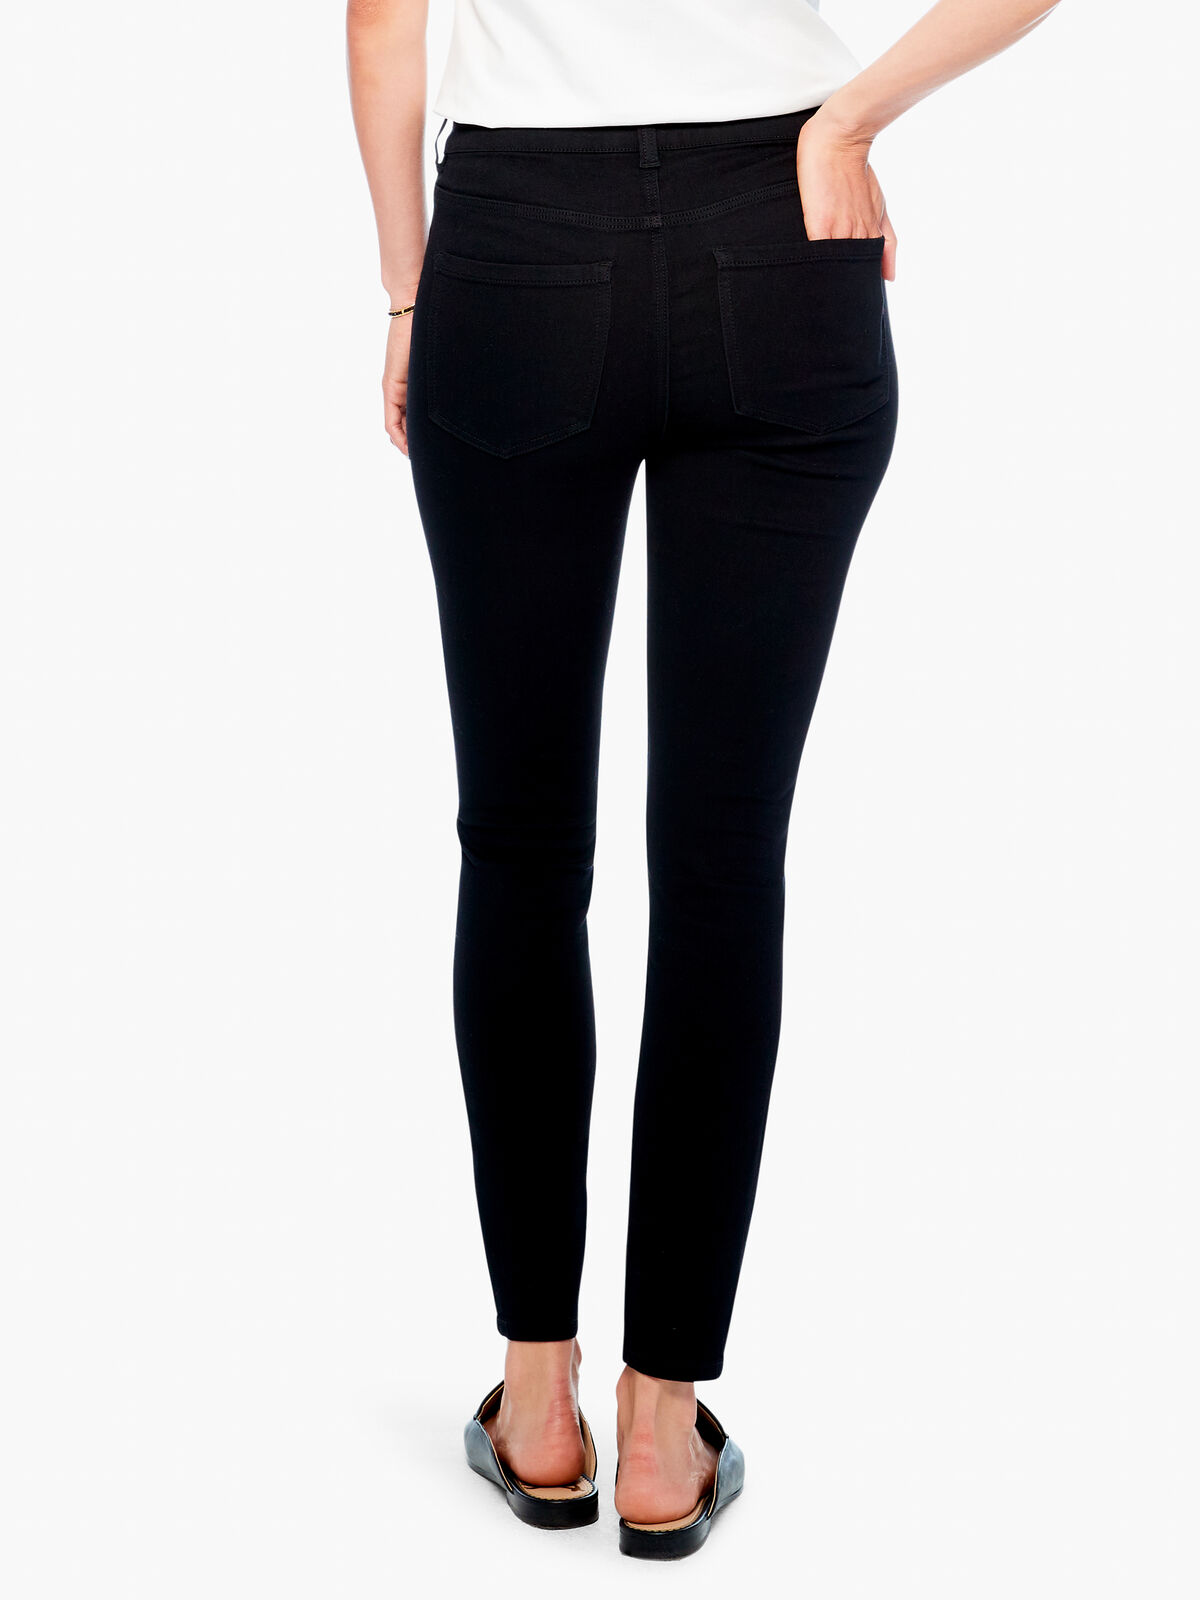 Liverpool - Gia Glider Ankle Skinny Jean